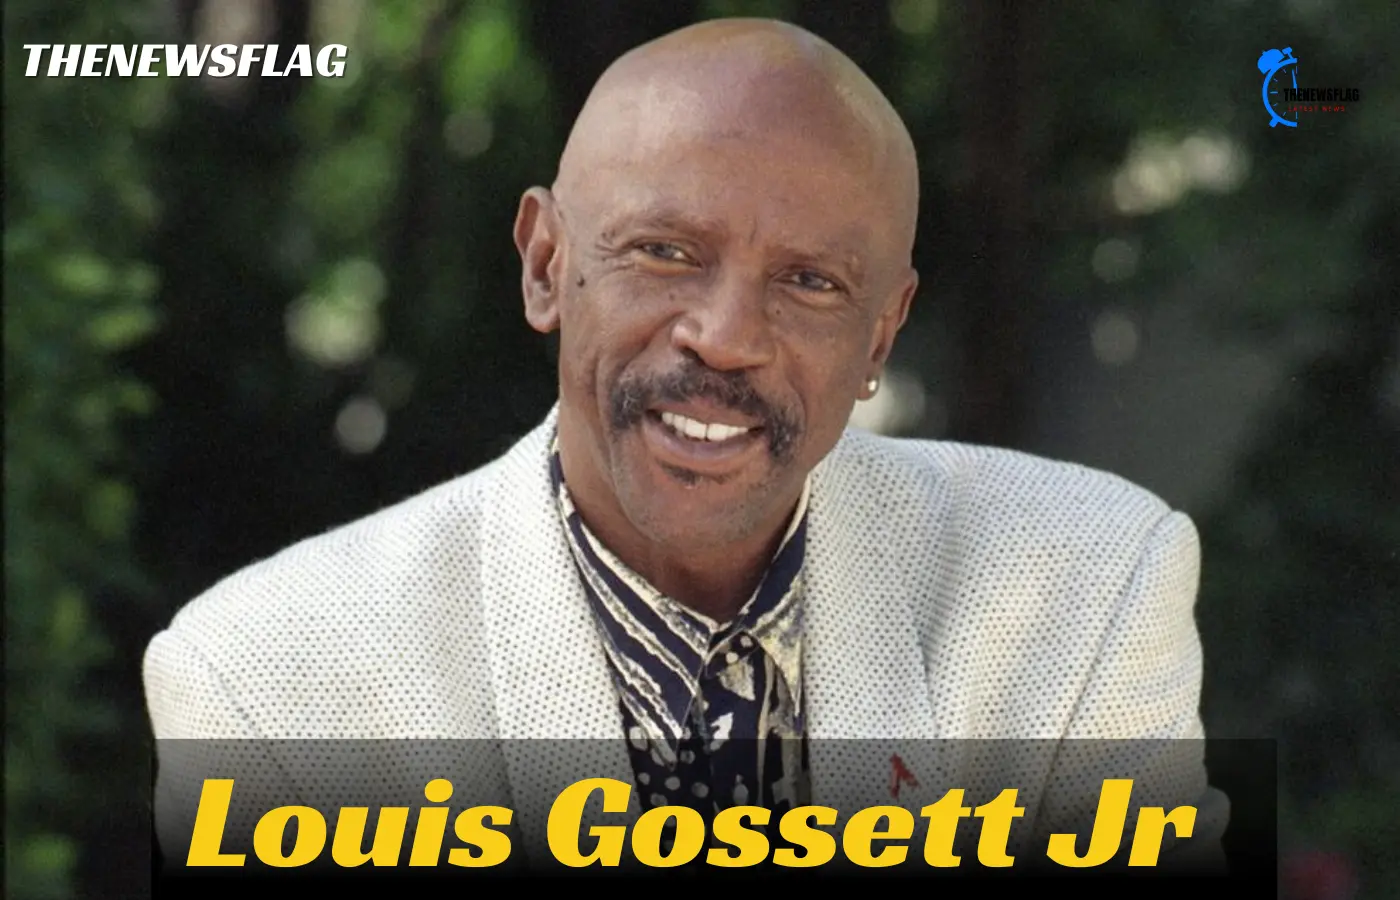 First Black man to win an Oscar for supporting actor, Louis Gossett Jr., passes away at the age of 87.